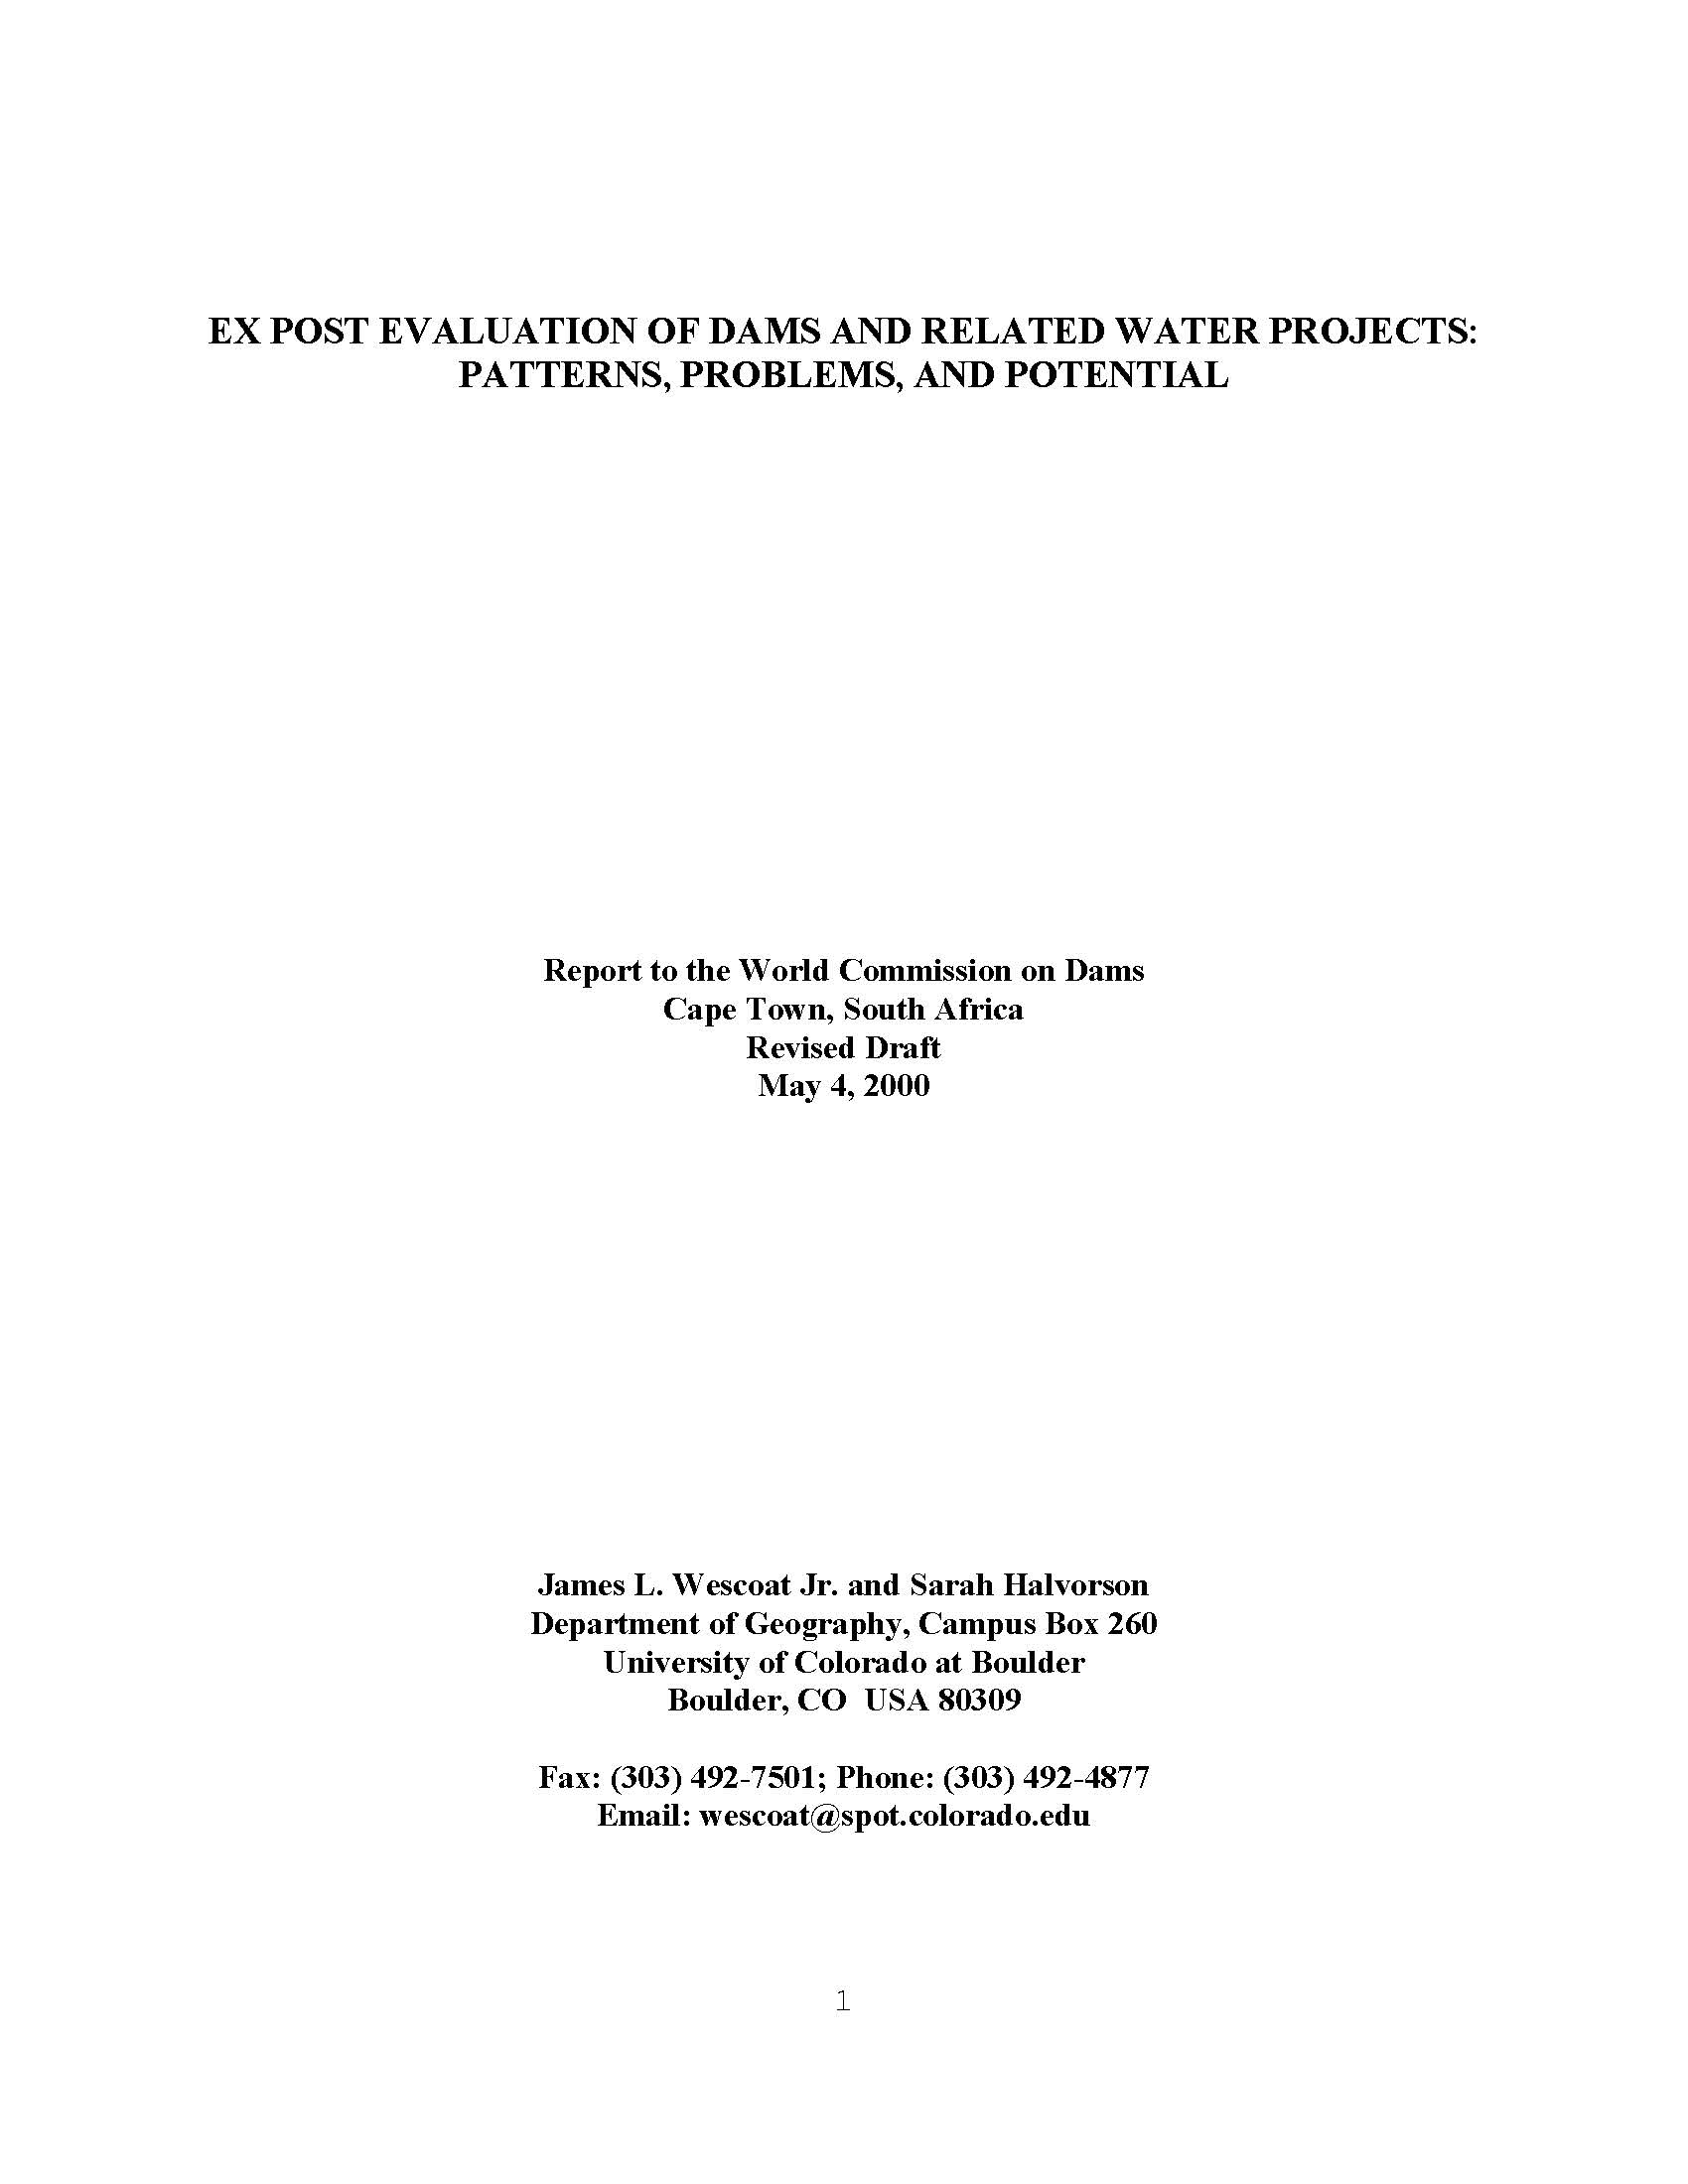 Ex Post Evaluation of Dams and Related Water Projects: Patterns, Problems, and Potential